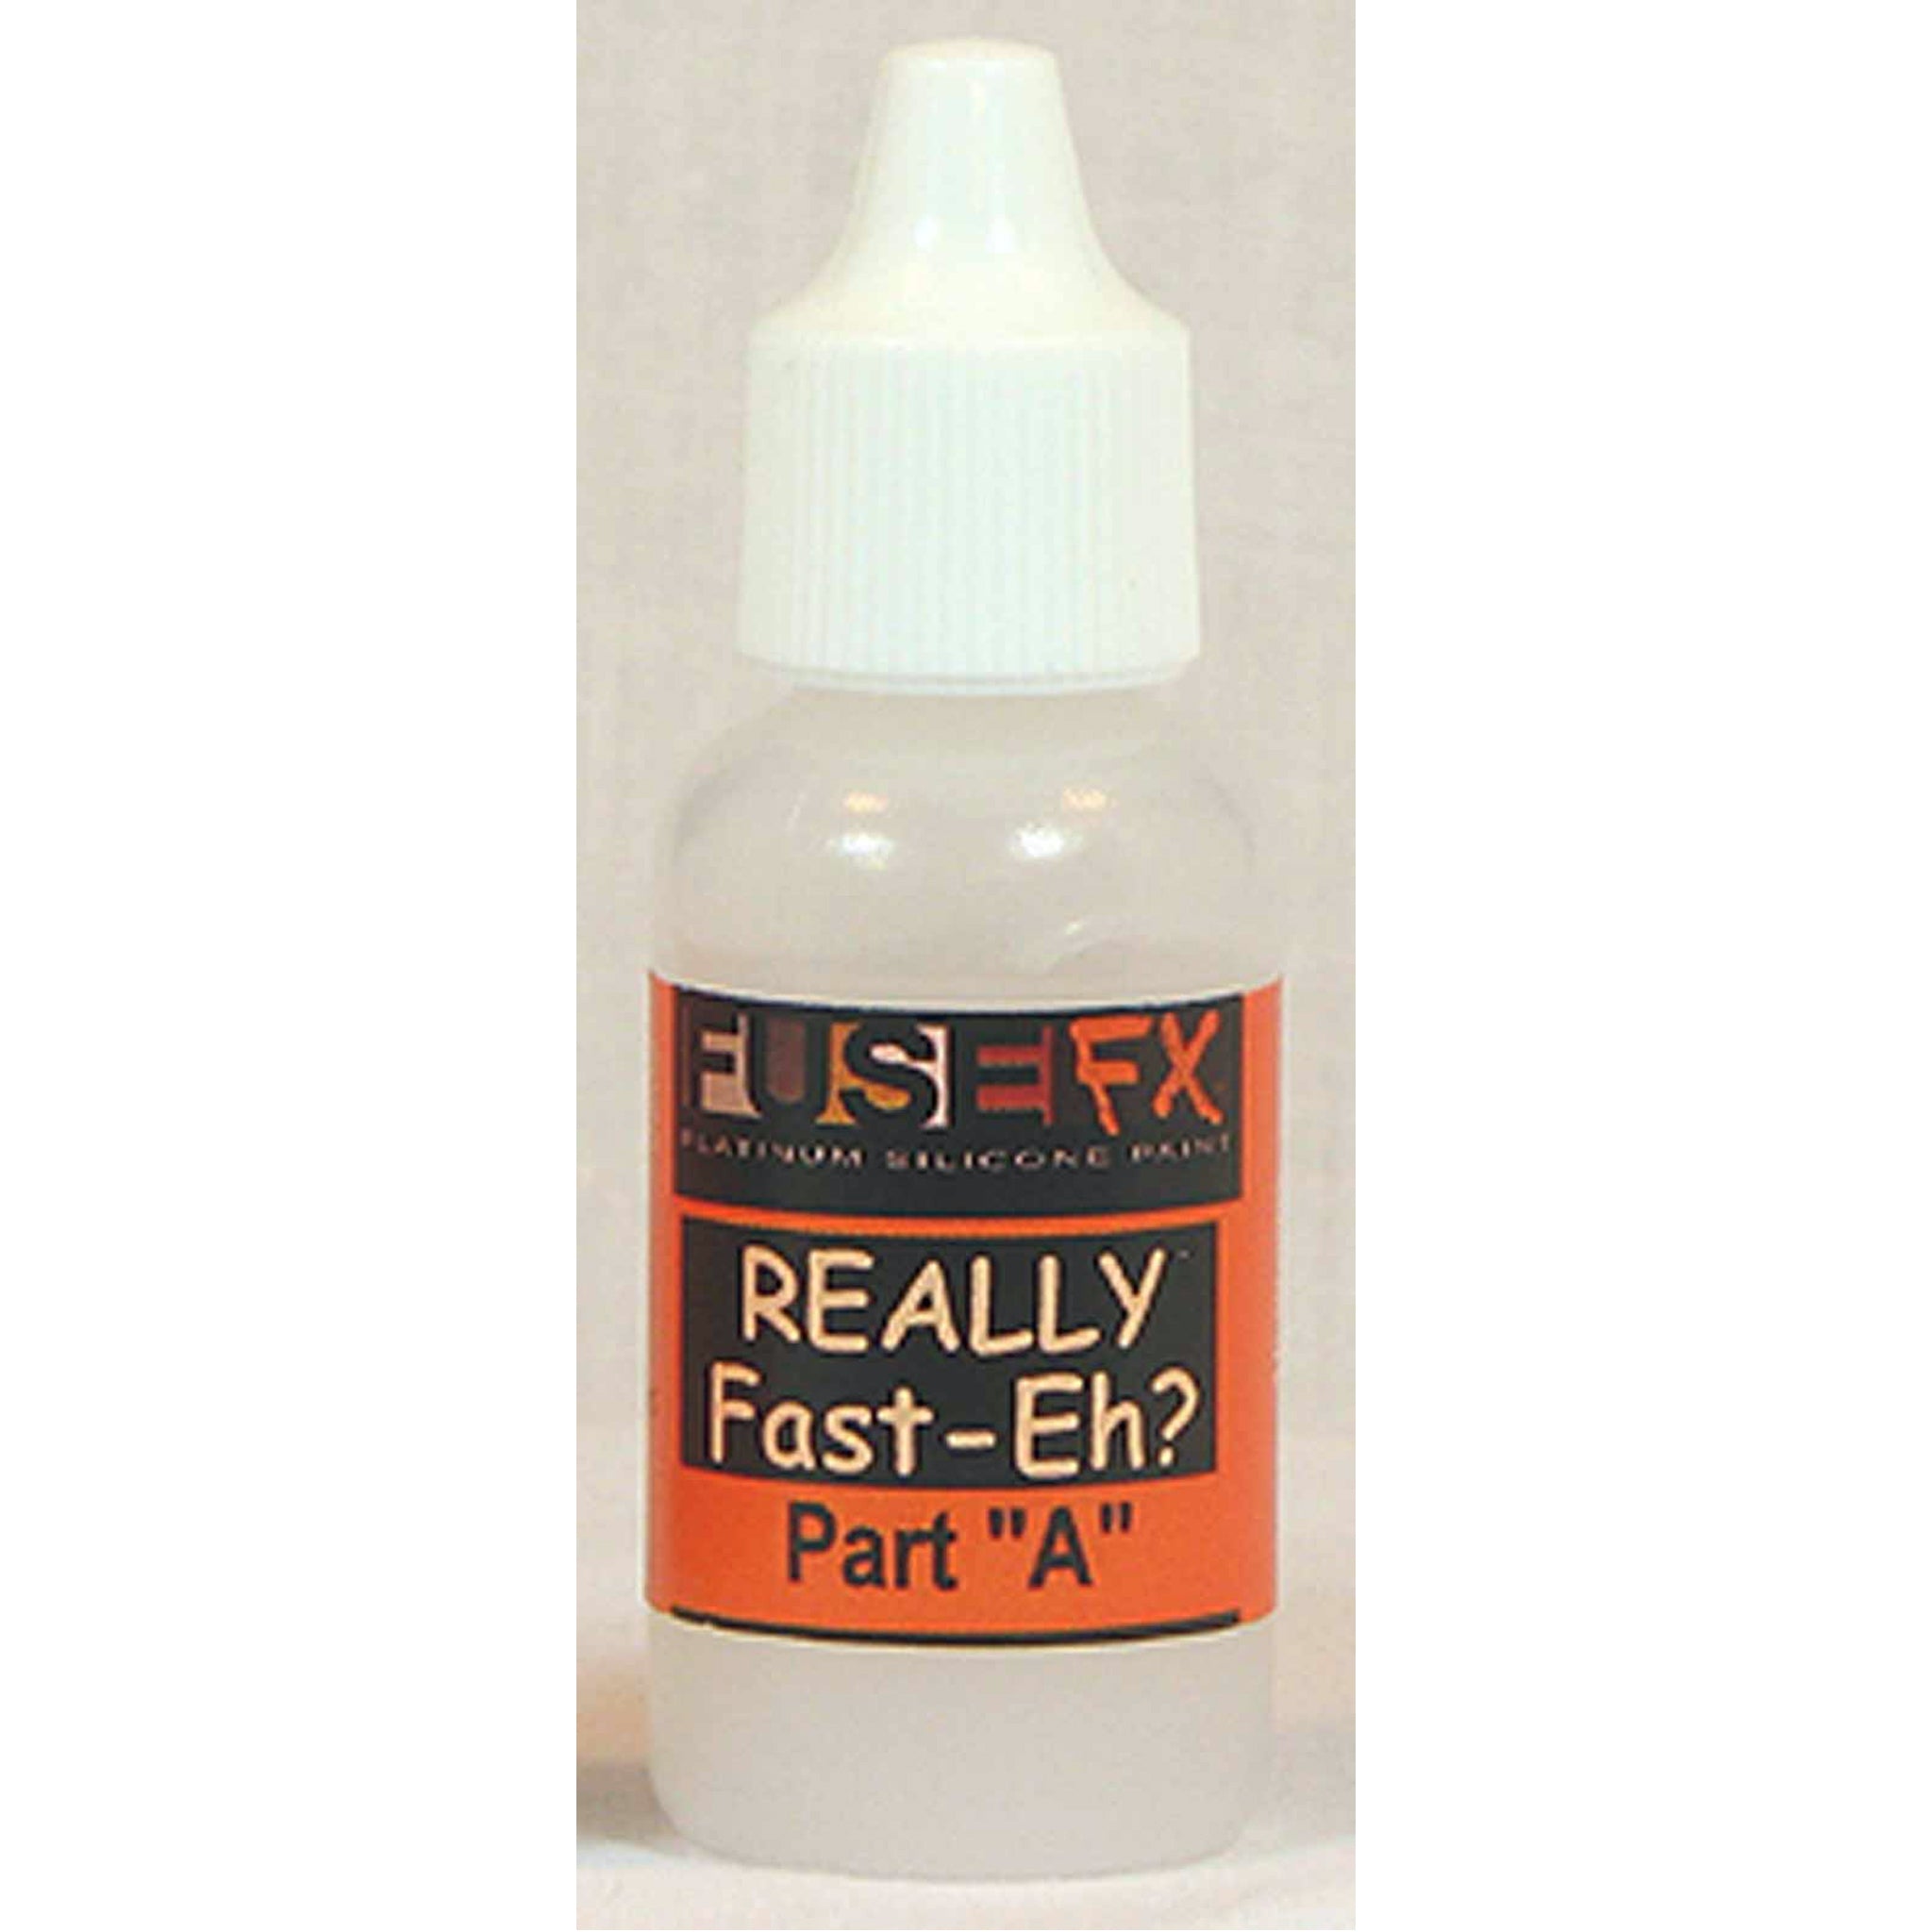 FuseFX Really Fast Eh? Silicone Accelerator